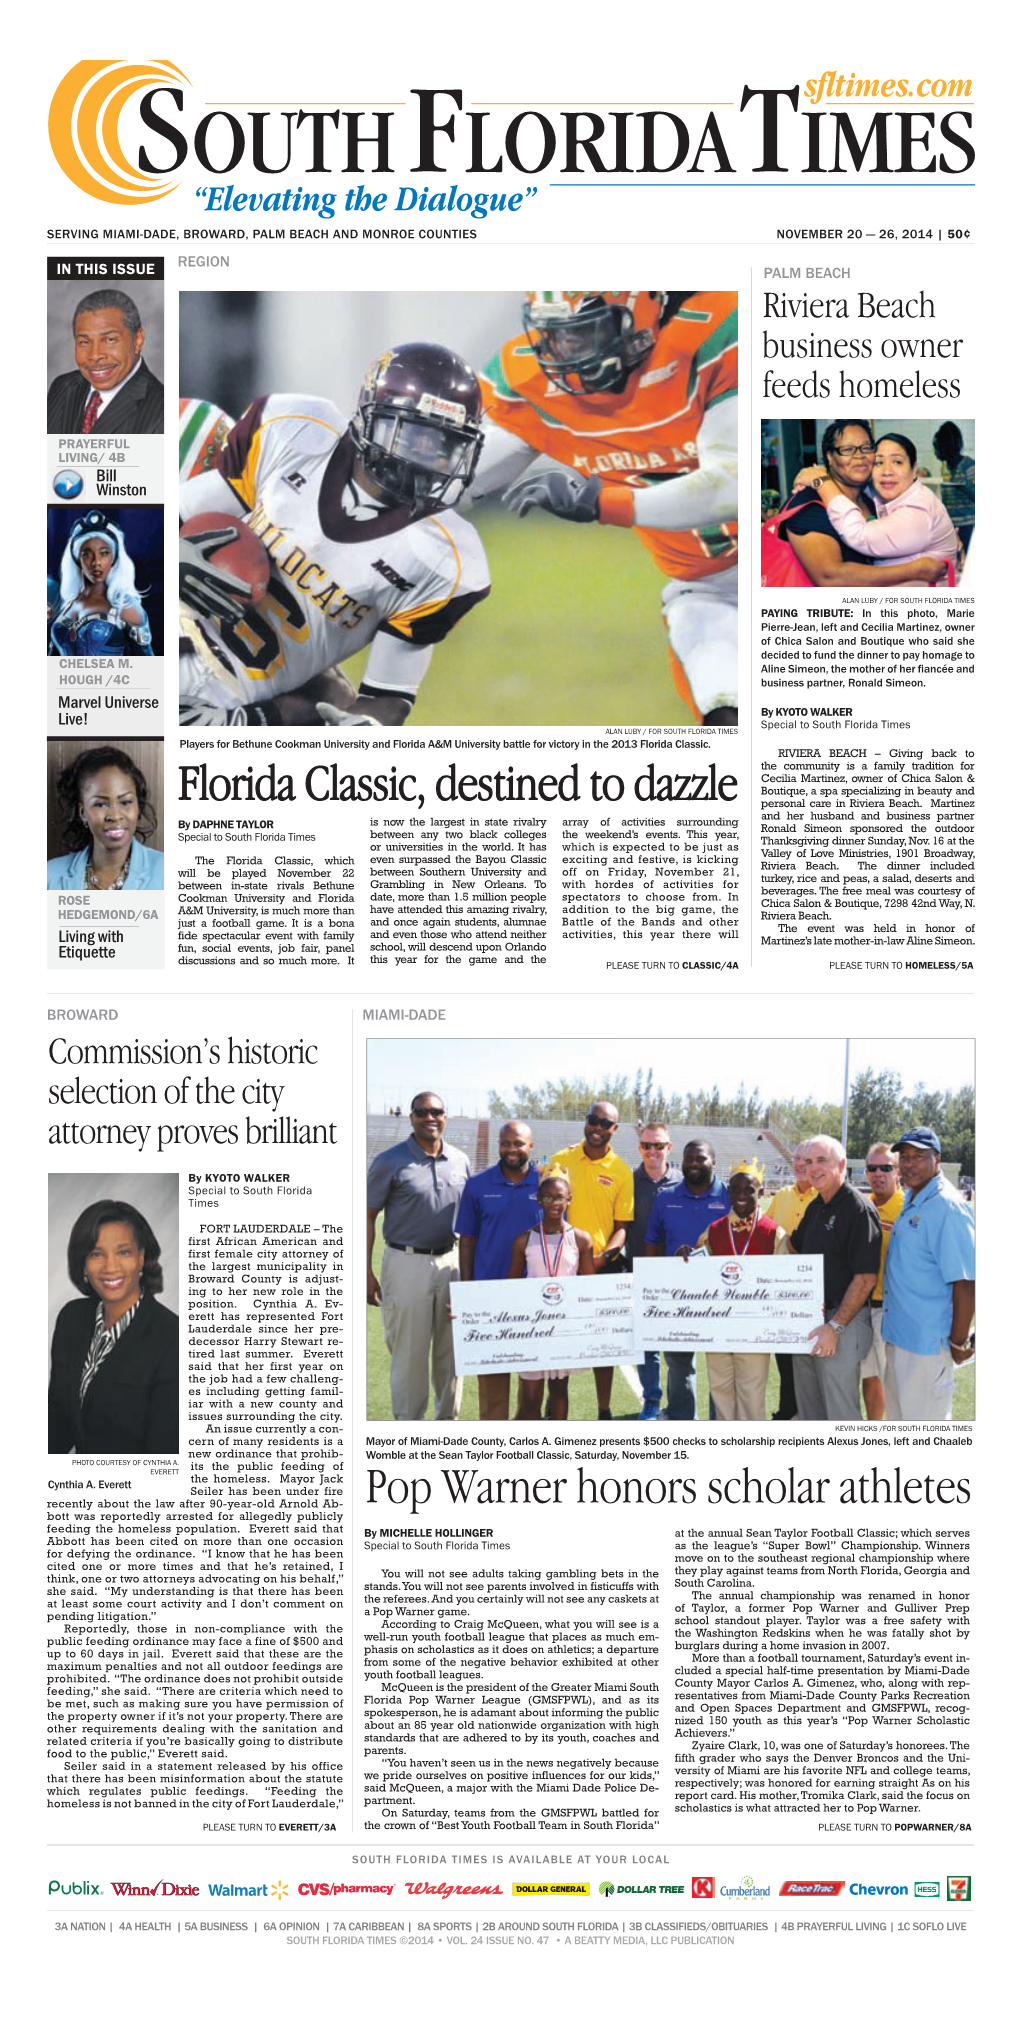 Florida Classic, Destined to Dazzle Pop Warner Honors Scholar Athletes